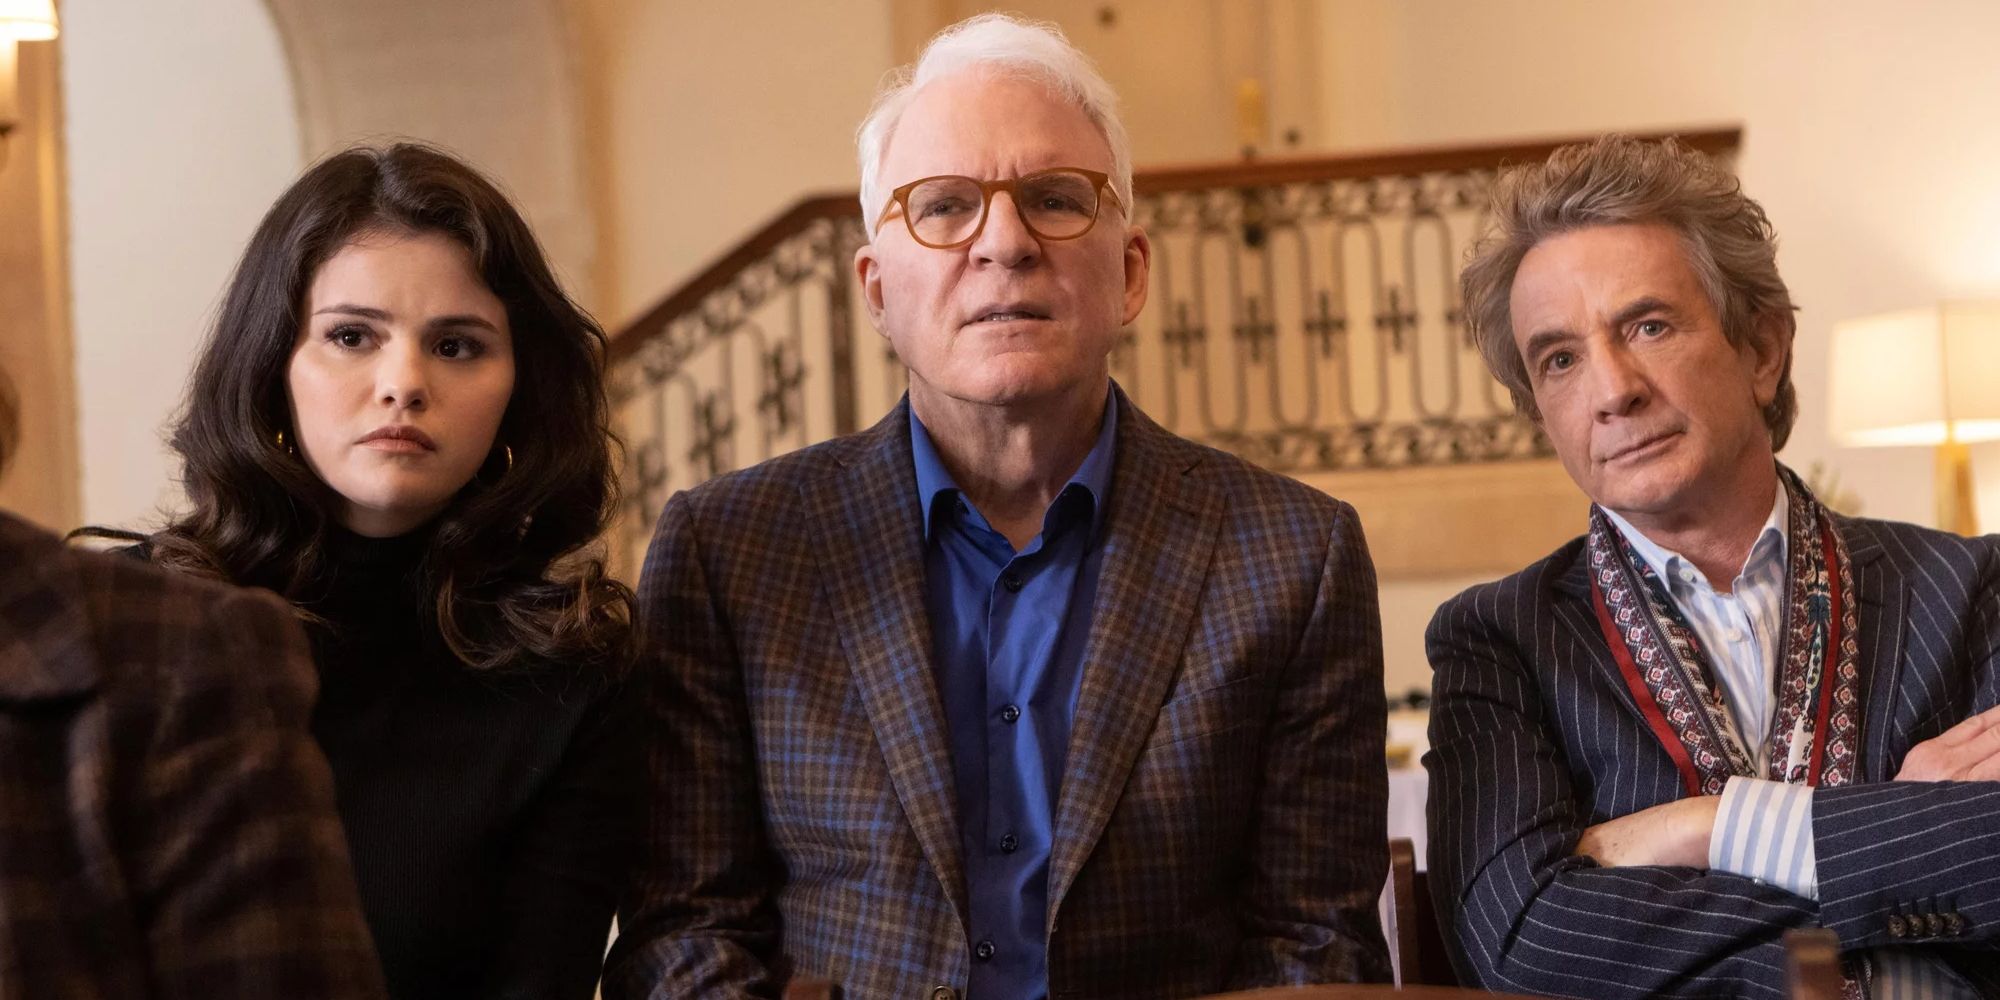 Selena Gomez, Steve Martin, and Martin Short in season 1 of "Only Murders in the Building"